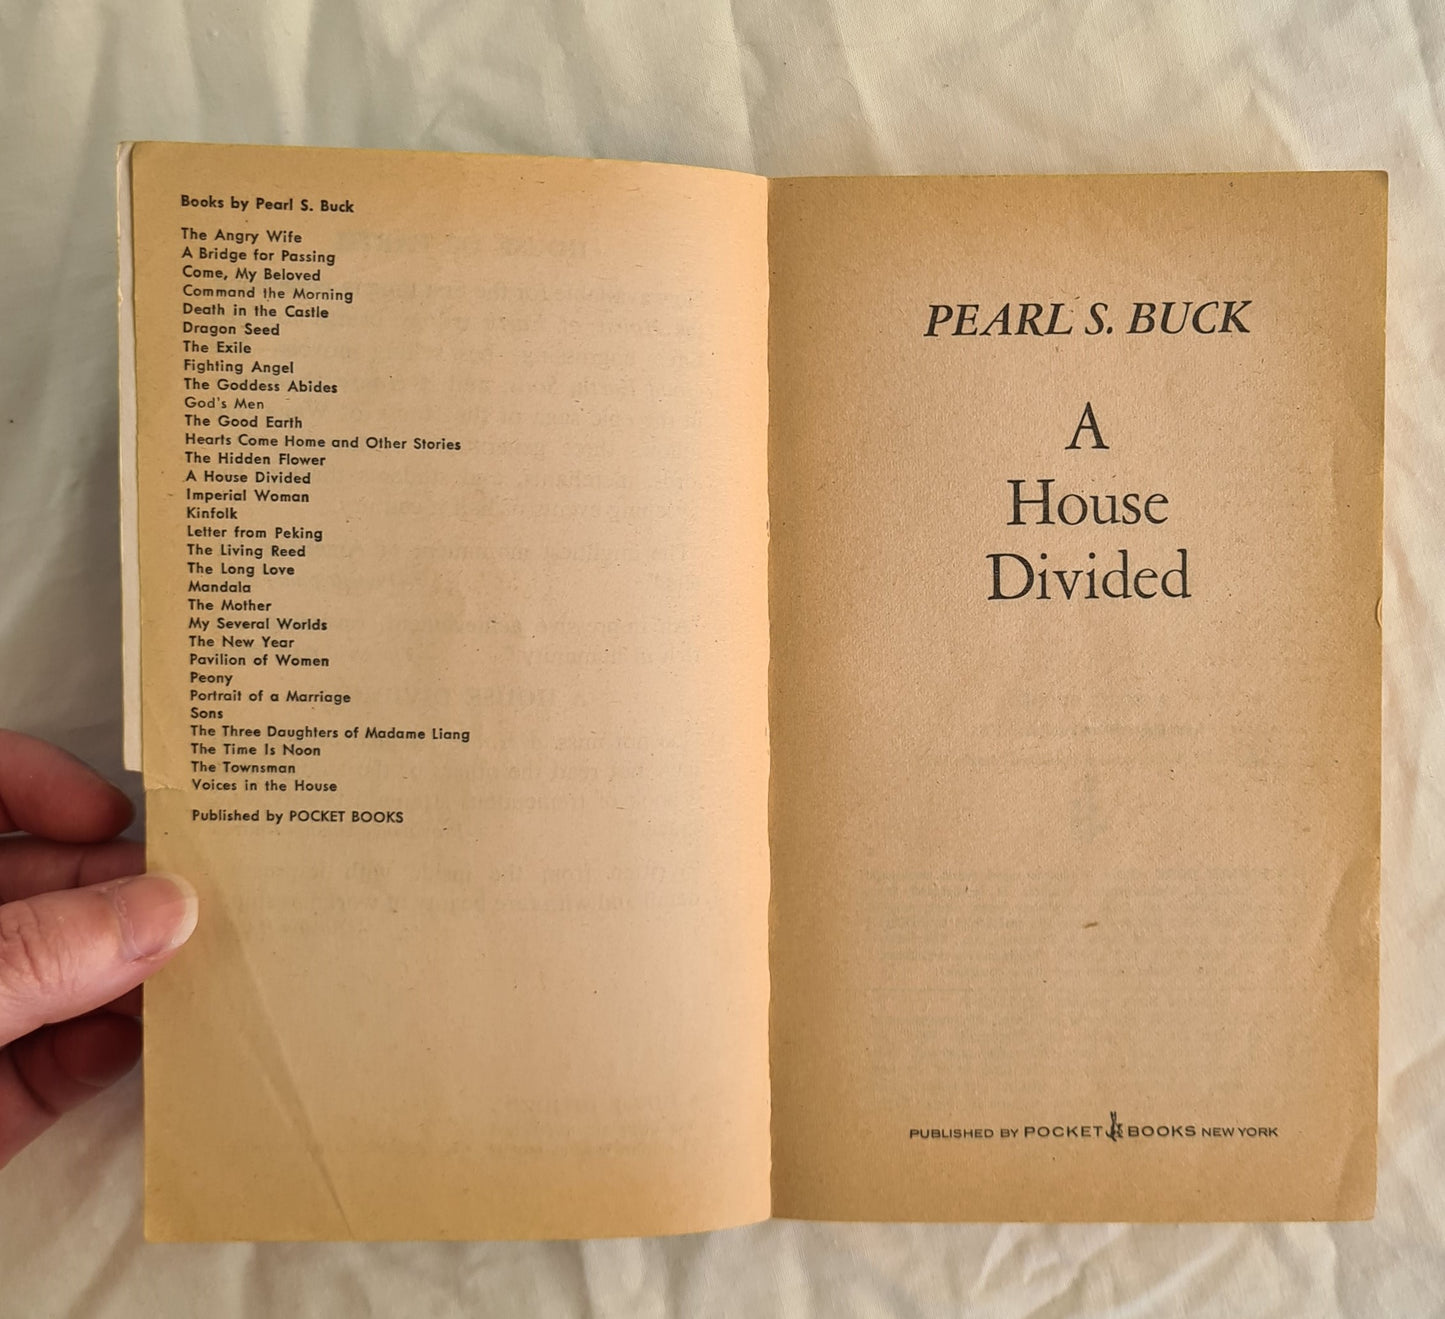 A House Divided by Peral S. Buck